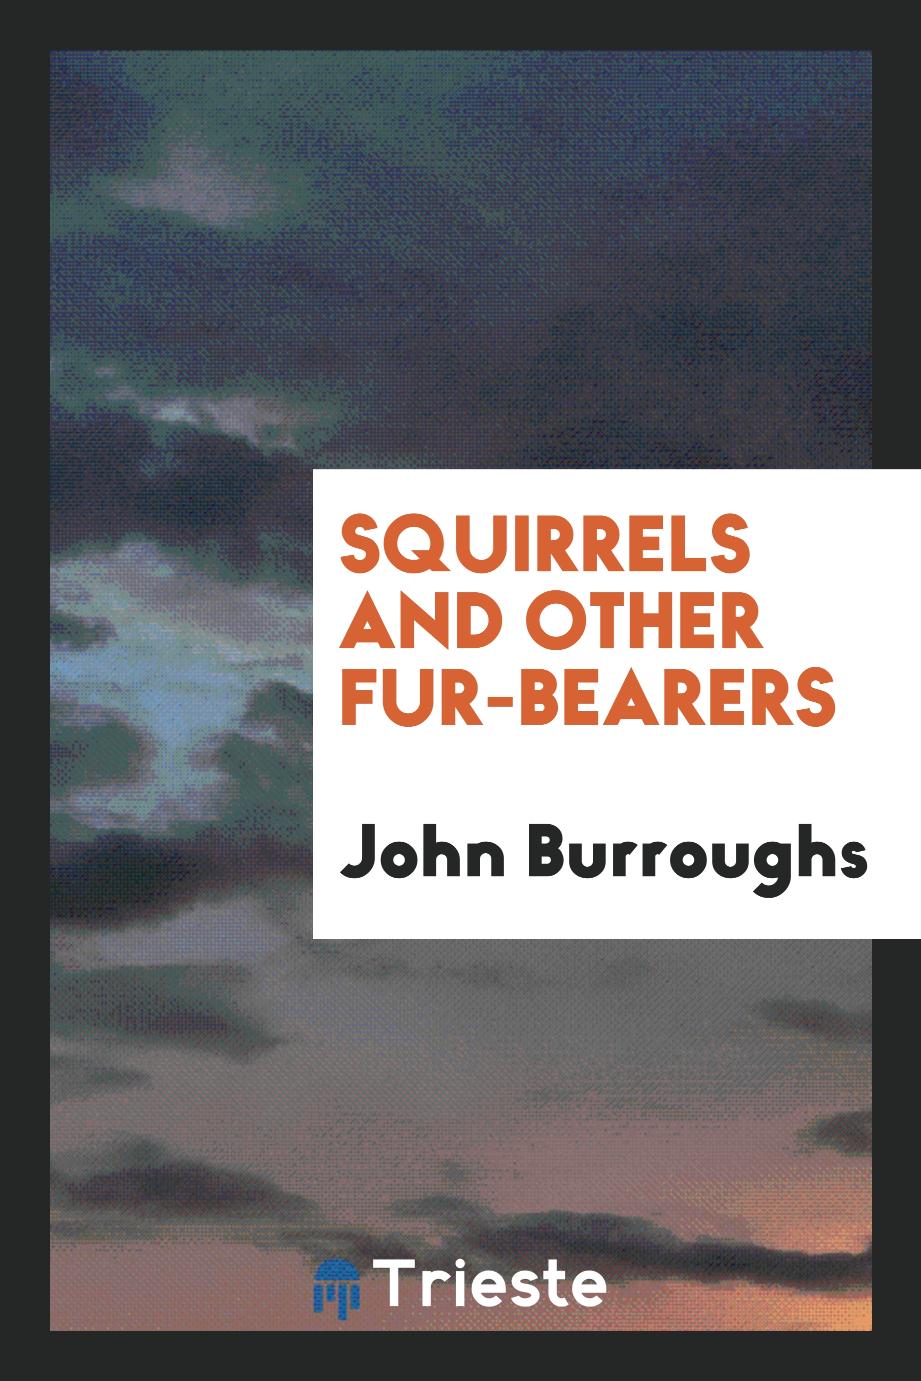 Squirrels and other fur-bearers